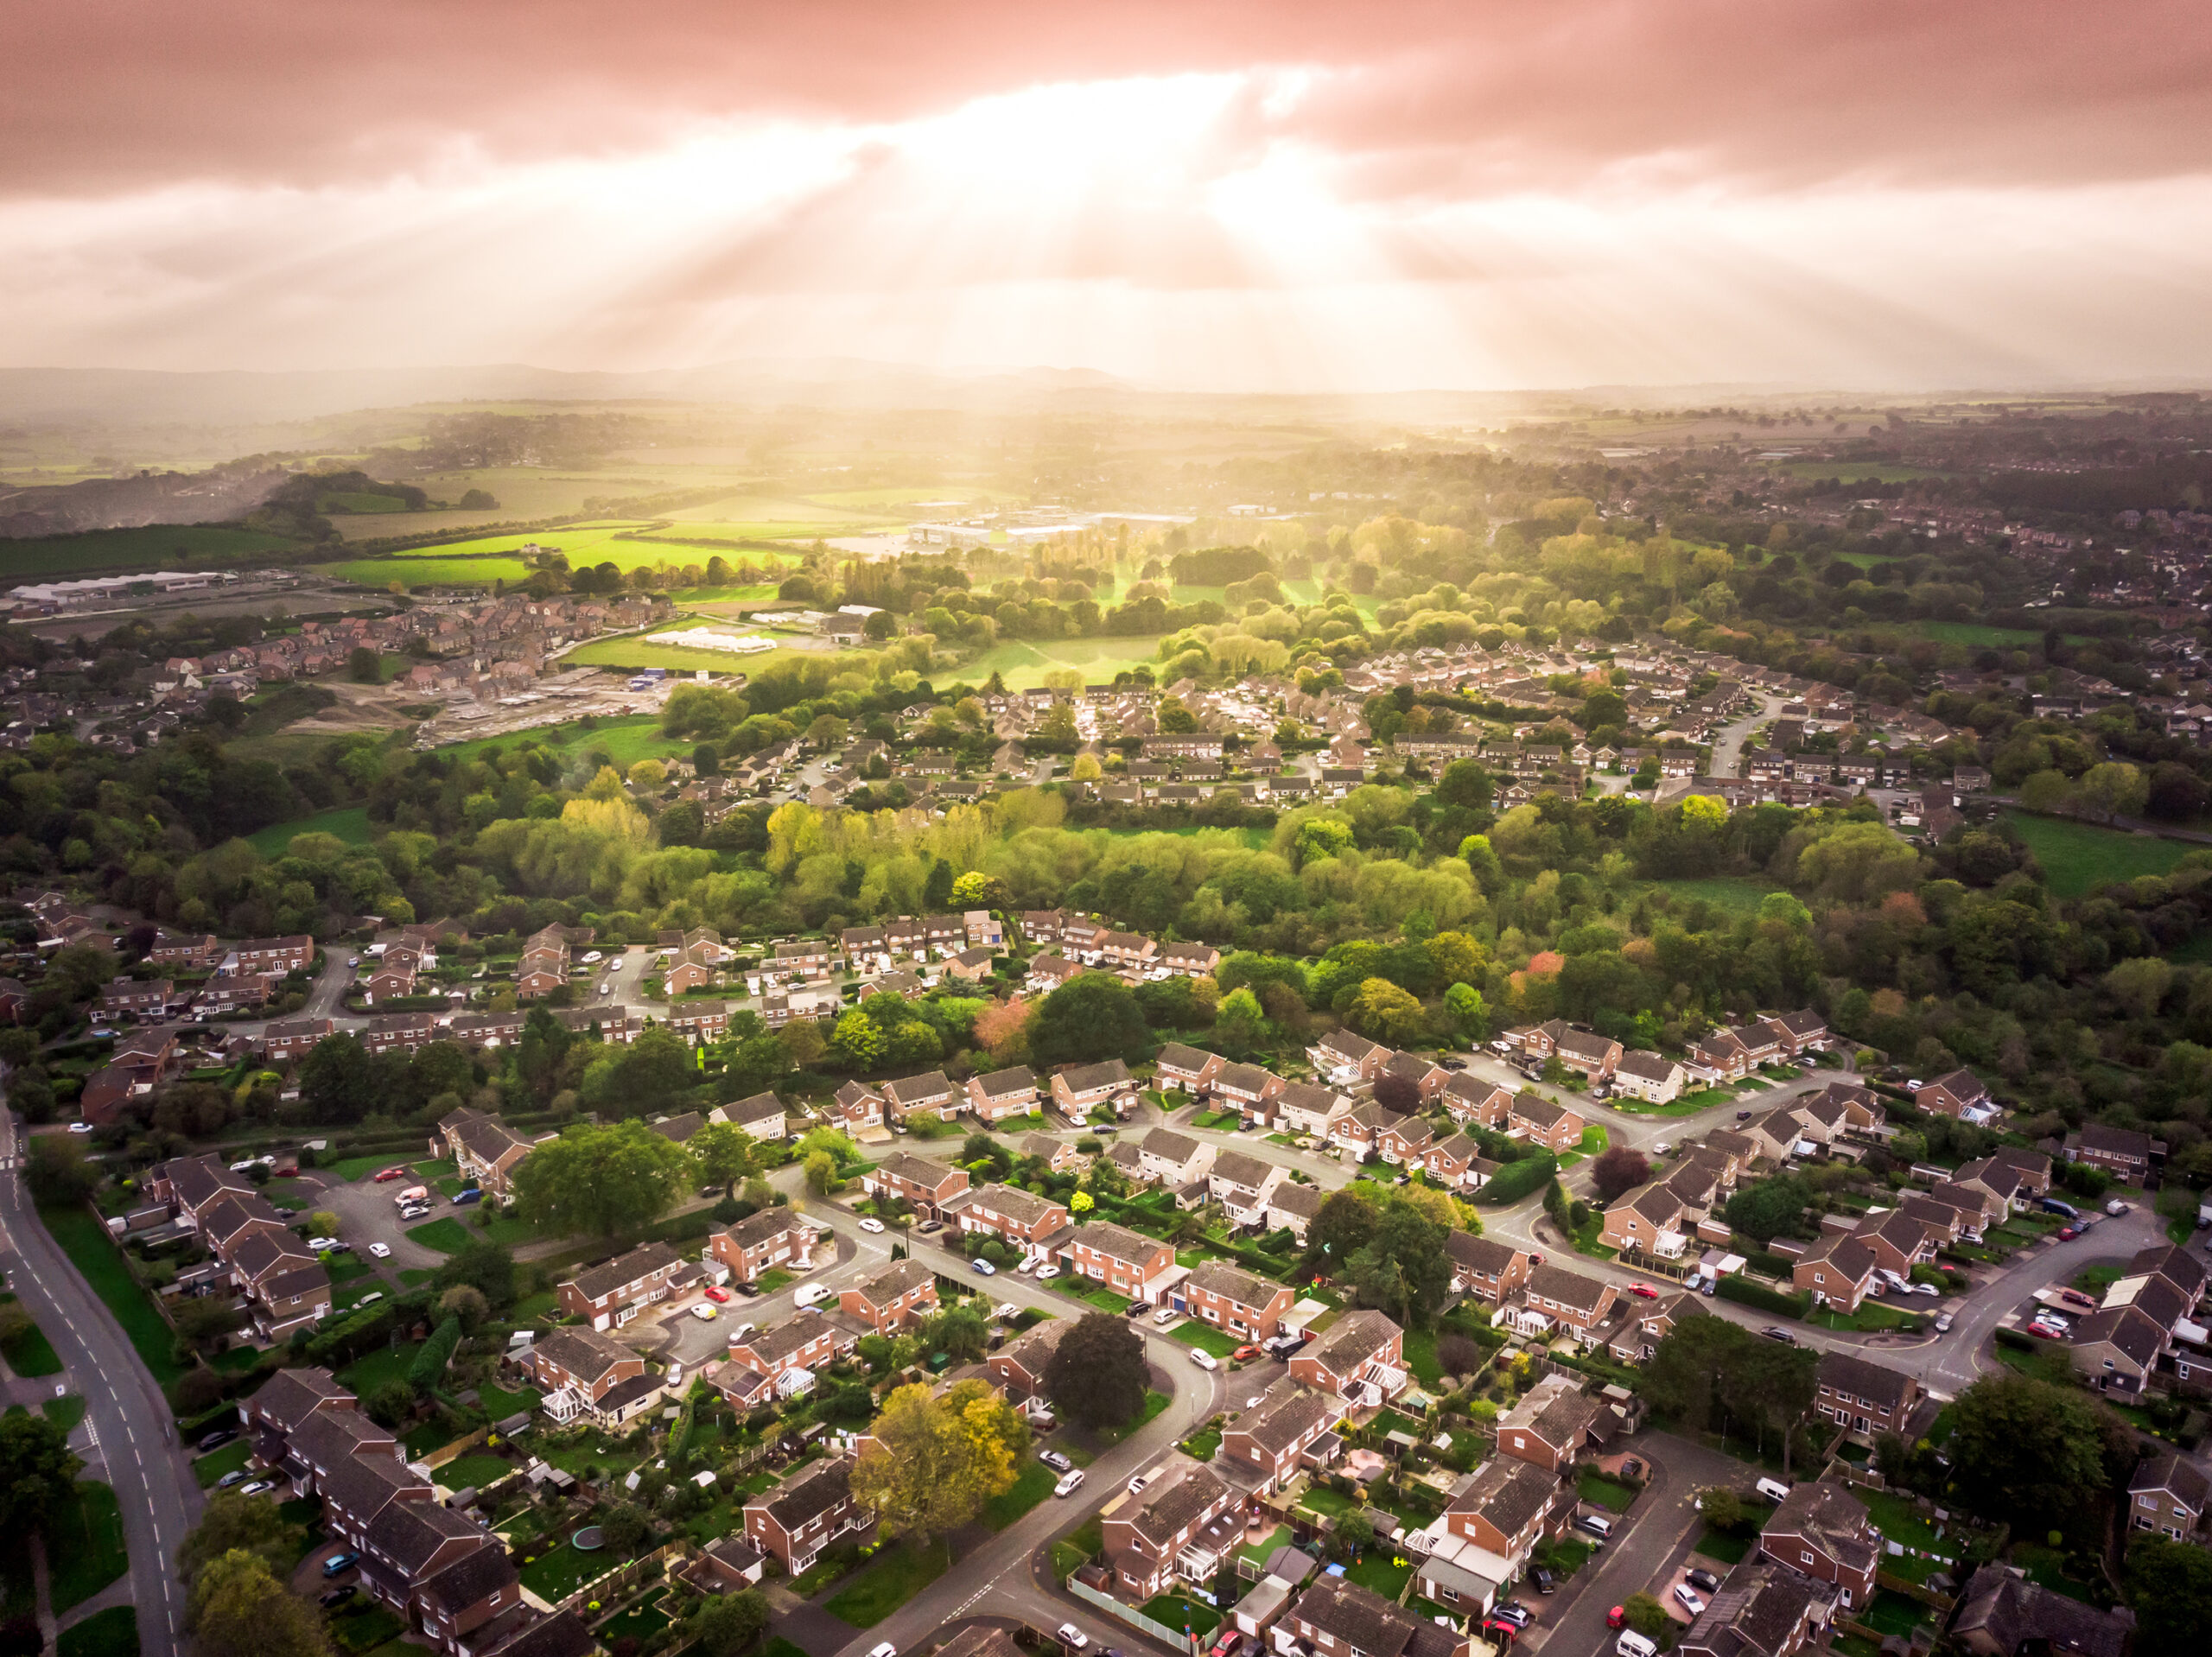 New housing developments must prioritise a sense of community, say UK residents @eurocellplc